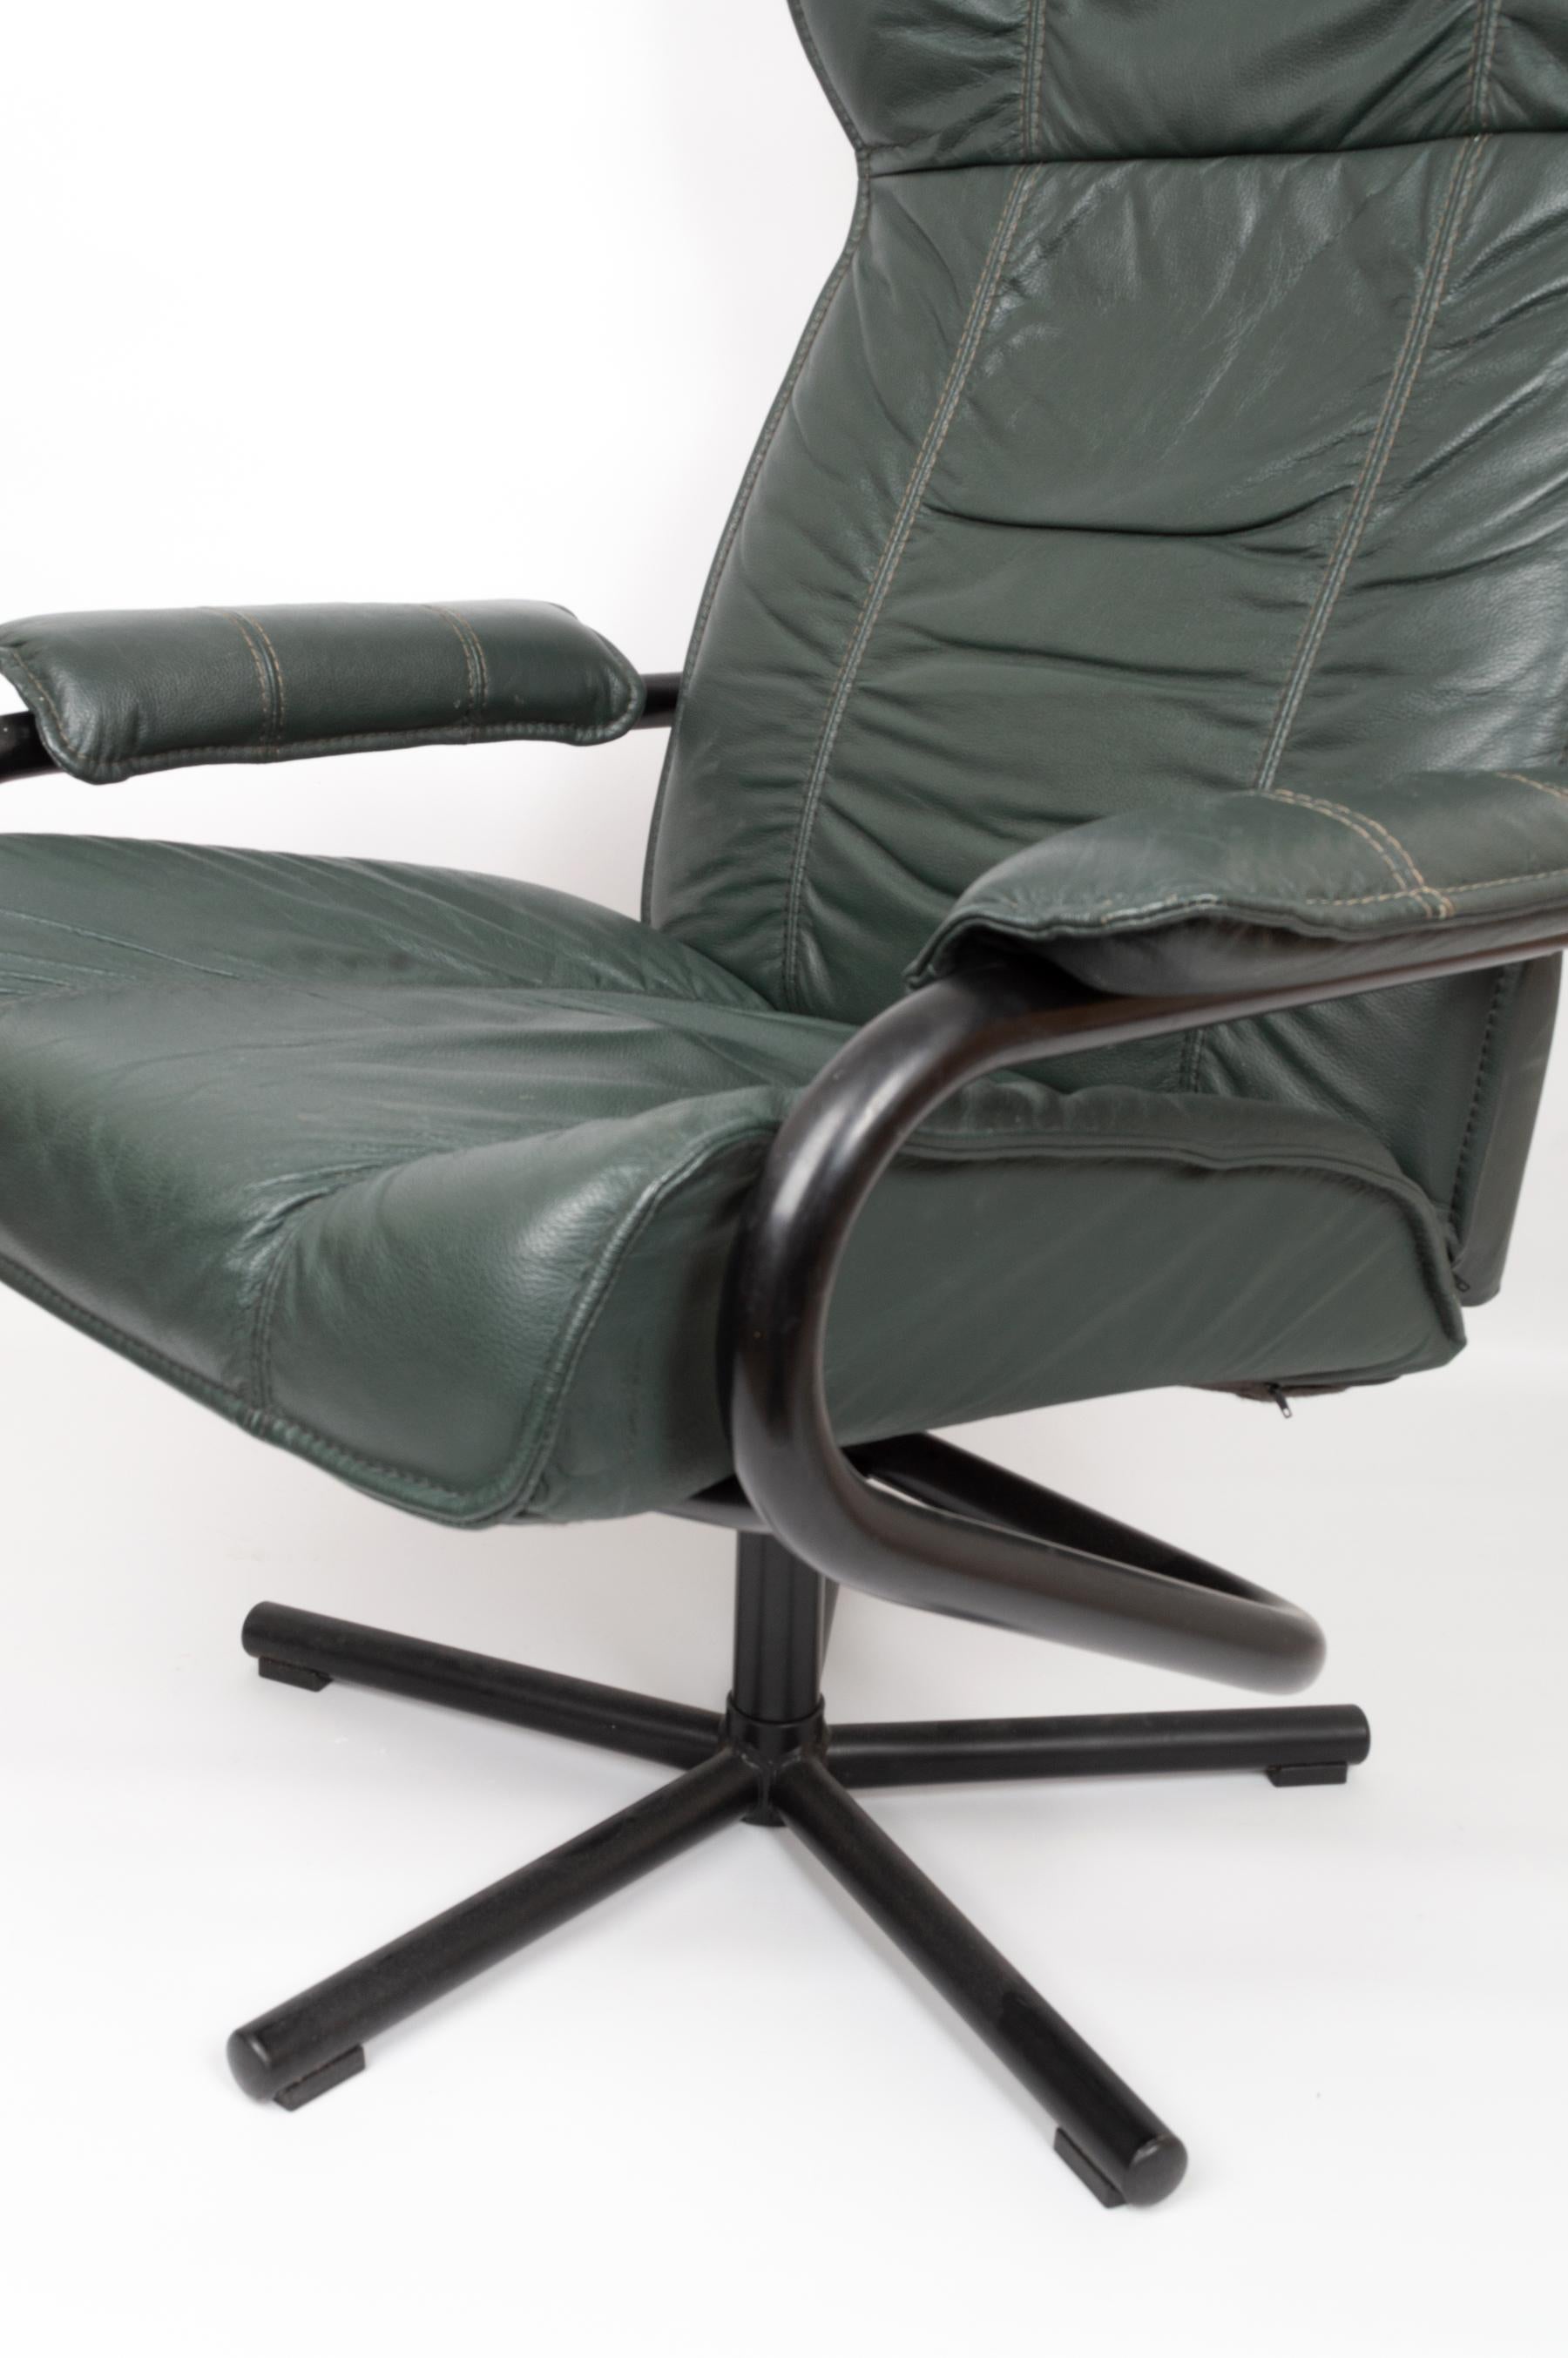 Danish leather reclining swivel lounge chair by Kebe Denmark, circa 1970.

Racing green leather upholstery. 
Presented in excellently preserved condition. The chair both swivels and reclines, with the mechanism remaining in good working order.